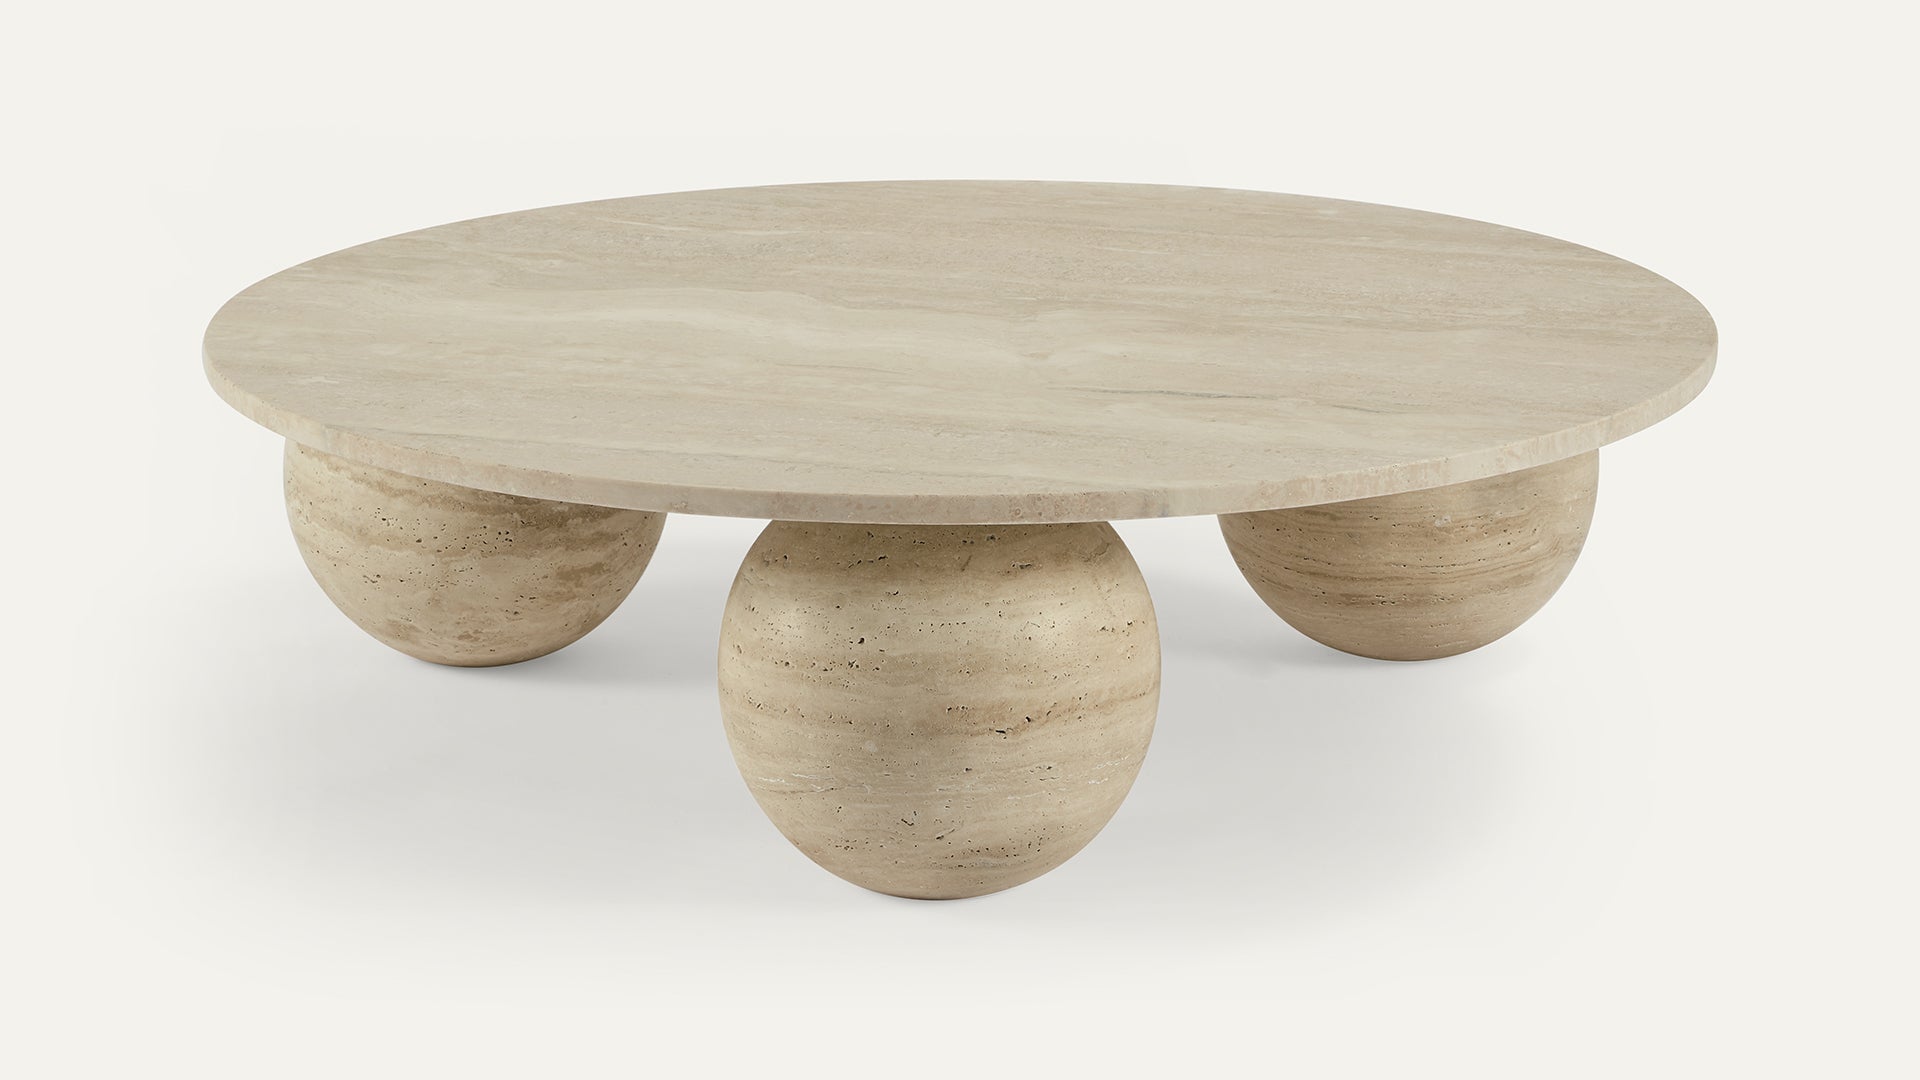 COSMOS Coffee Table in Filled & Honed Romano Travertine with Spaced Spheres